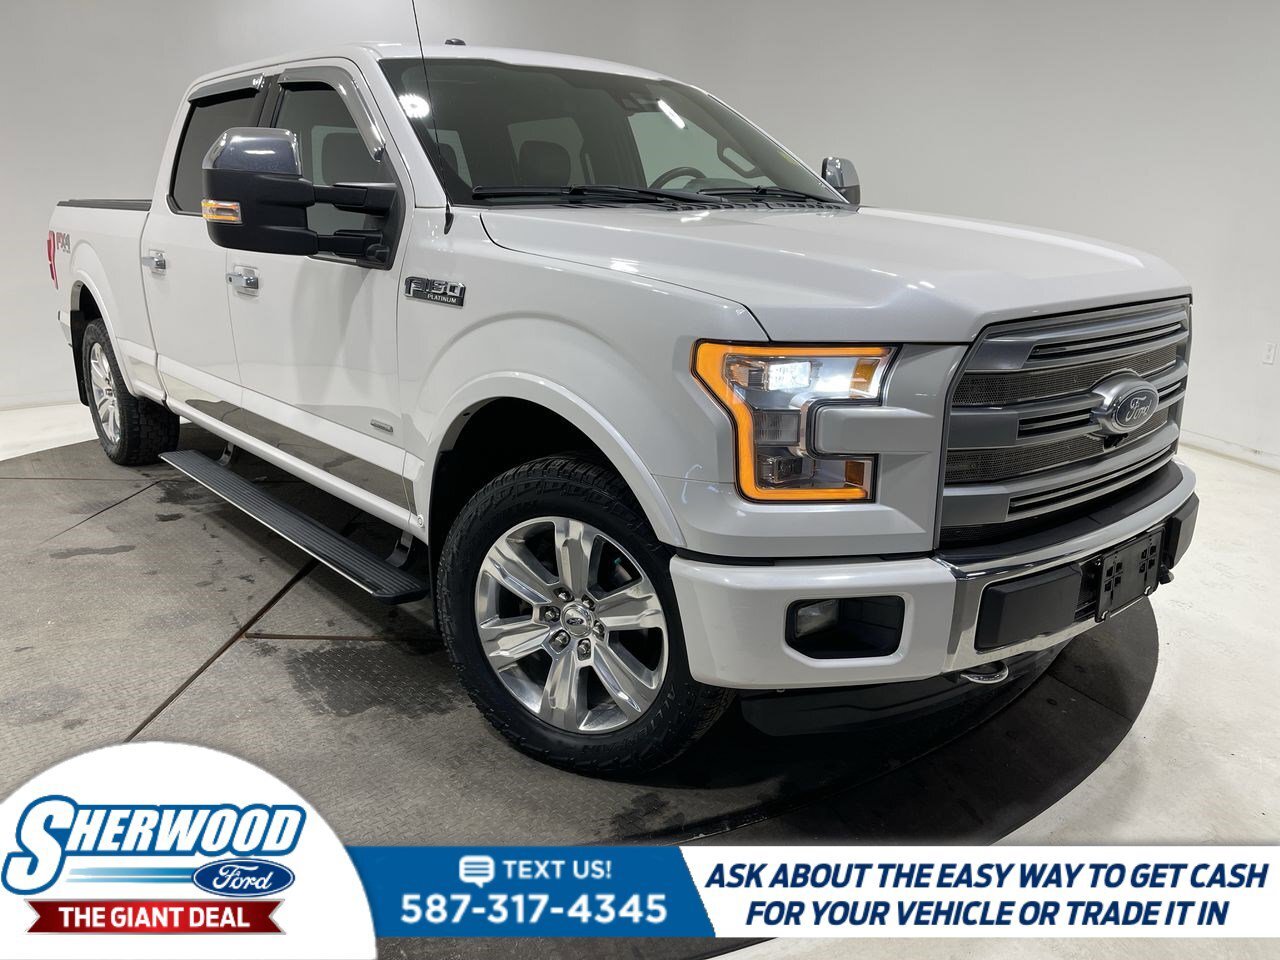 2015 Ford F-150 Platinum- $0 Down $185 Weekly- CLEAN CARFAX